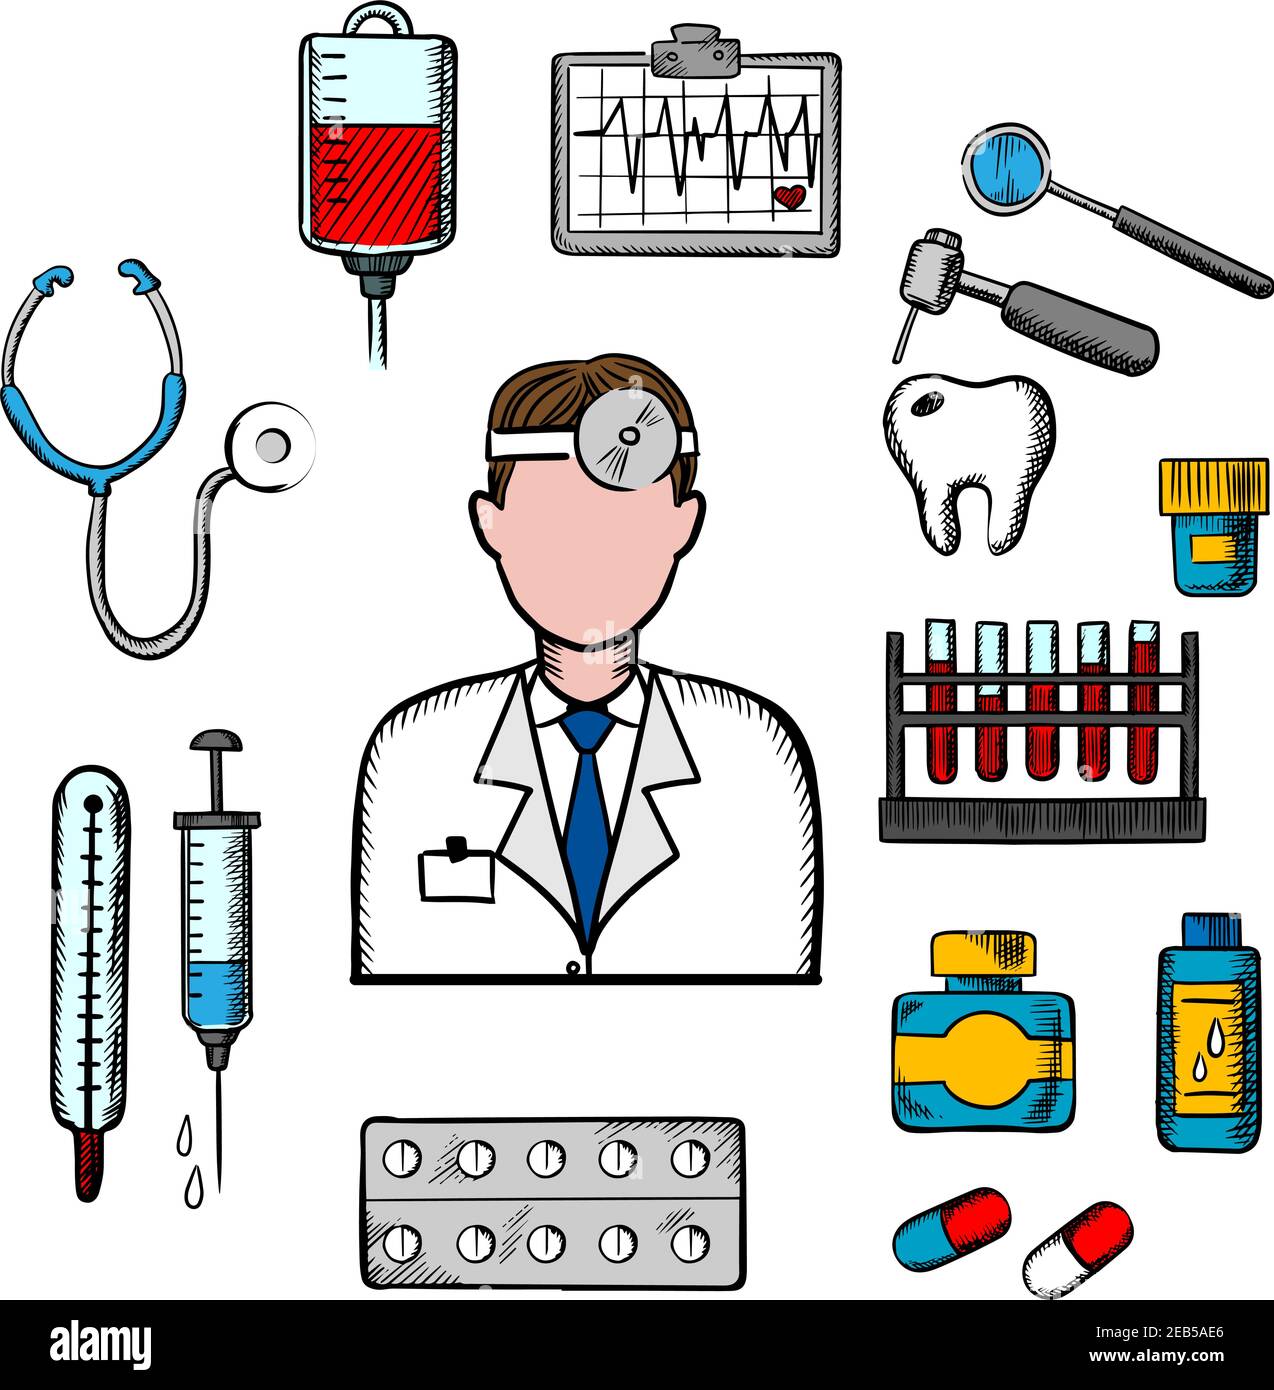 Doctor therapist in flat style with medical icons as tubes, flasks, drugs and pills, syringe, dentistry, blood transfusion, ultrasound stethoscope Stock Vector